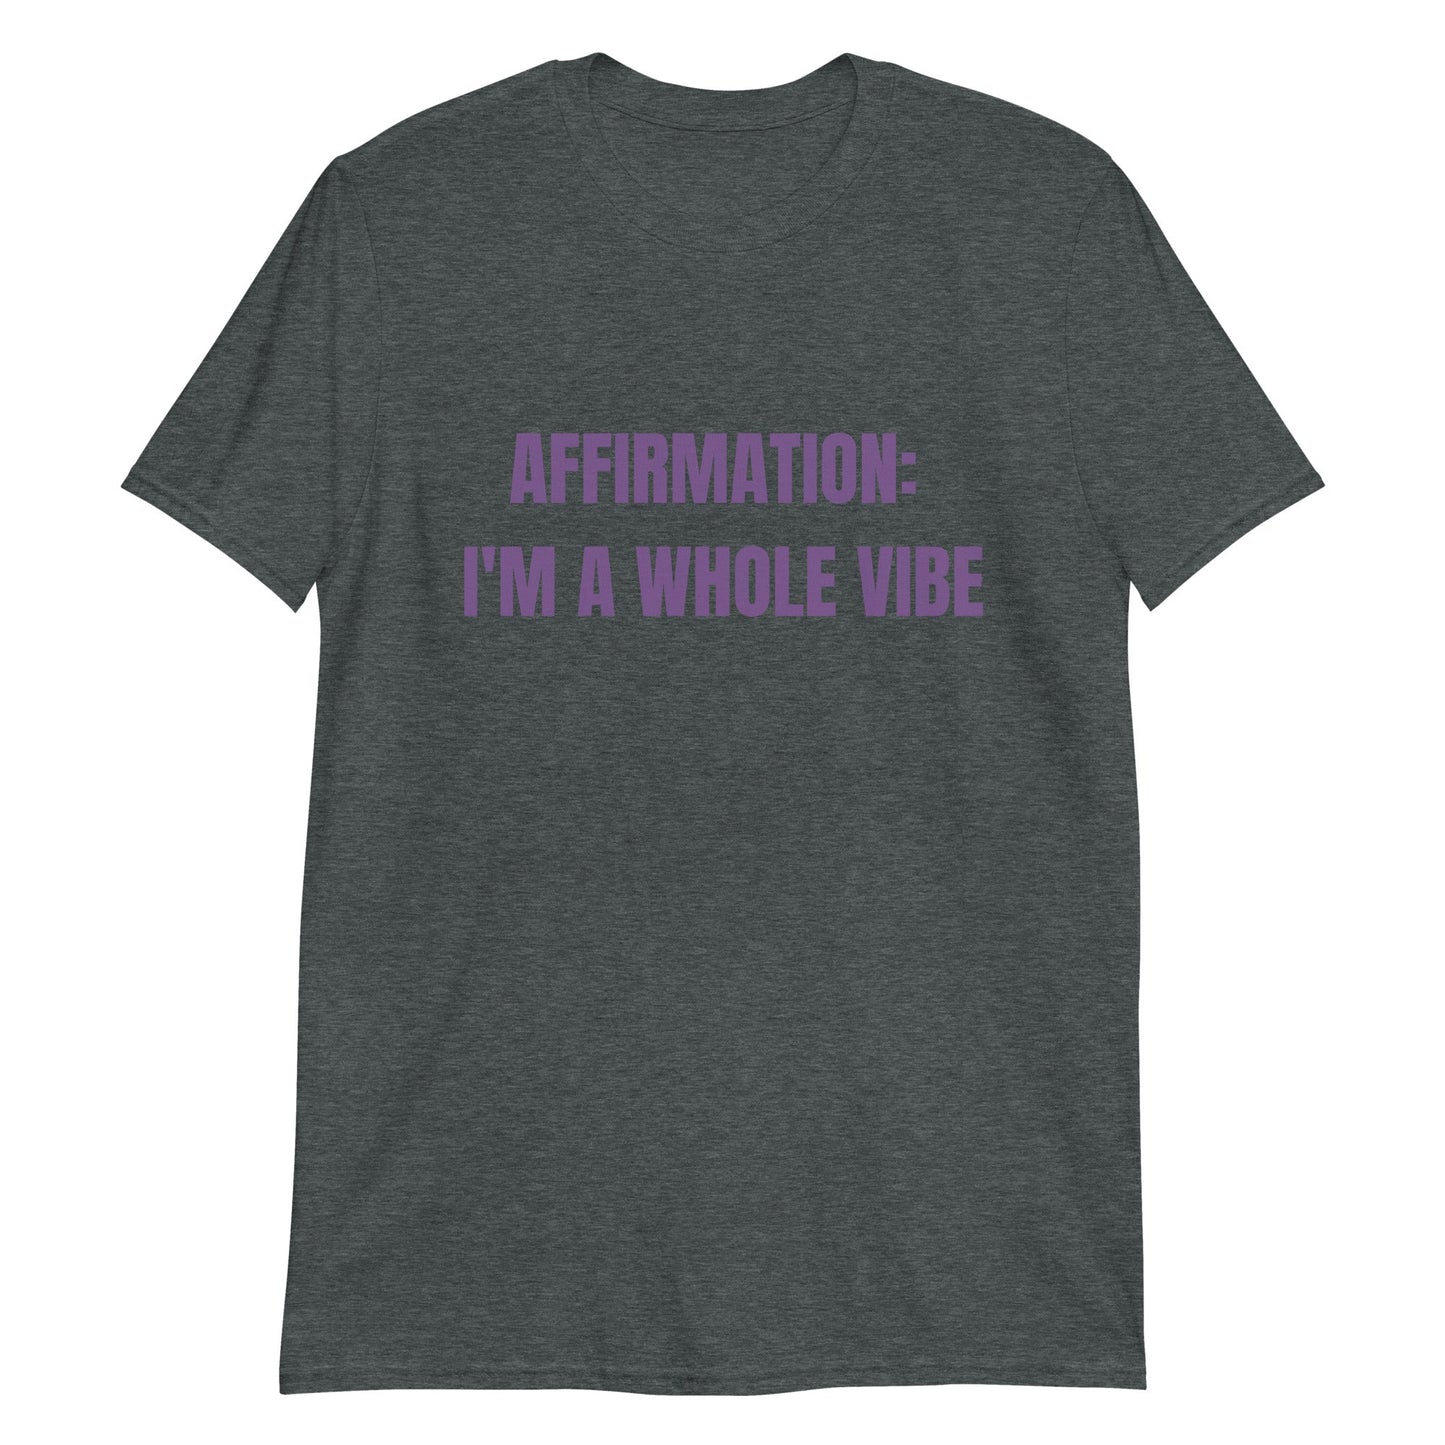 Affirmation: I'm a Whole Vibe Short-Sleeve Unisex T-Shirt (Refer to size chart - for a slim fir order a size down)Short-Sleeve Unisex T-Shirt - Catch This Tea Shirts